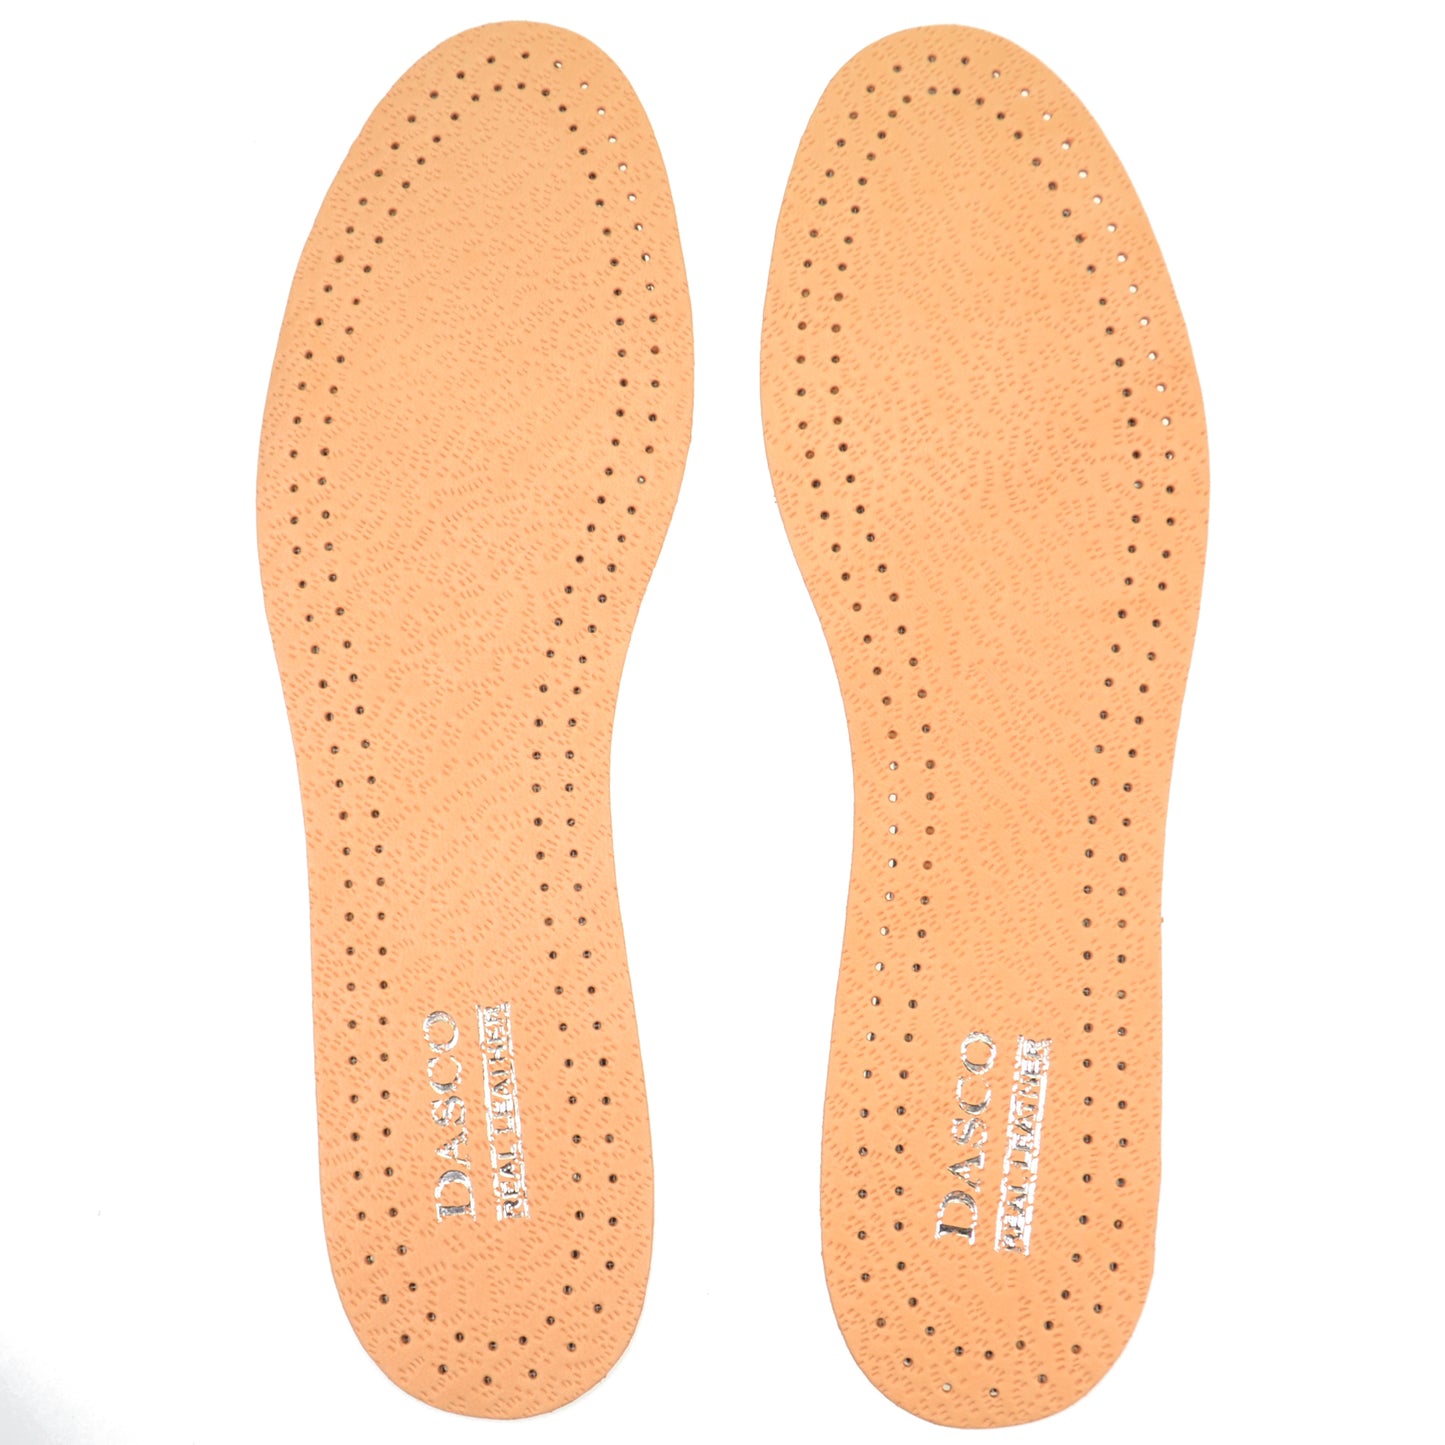 Dasco Mens Textured Leather Insole